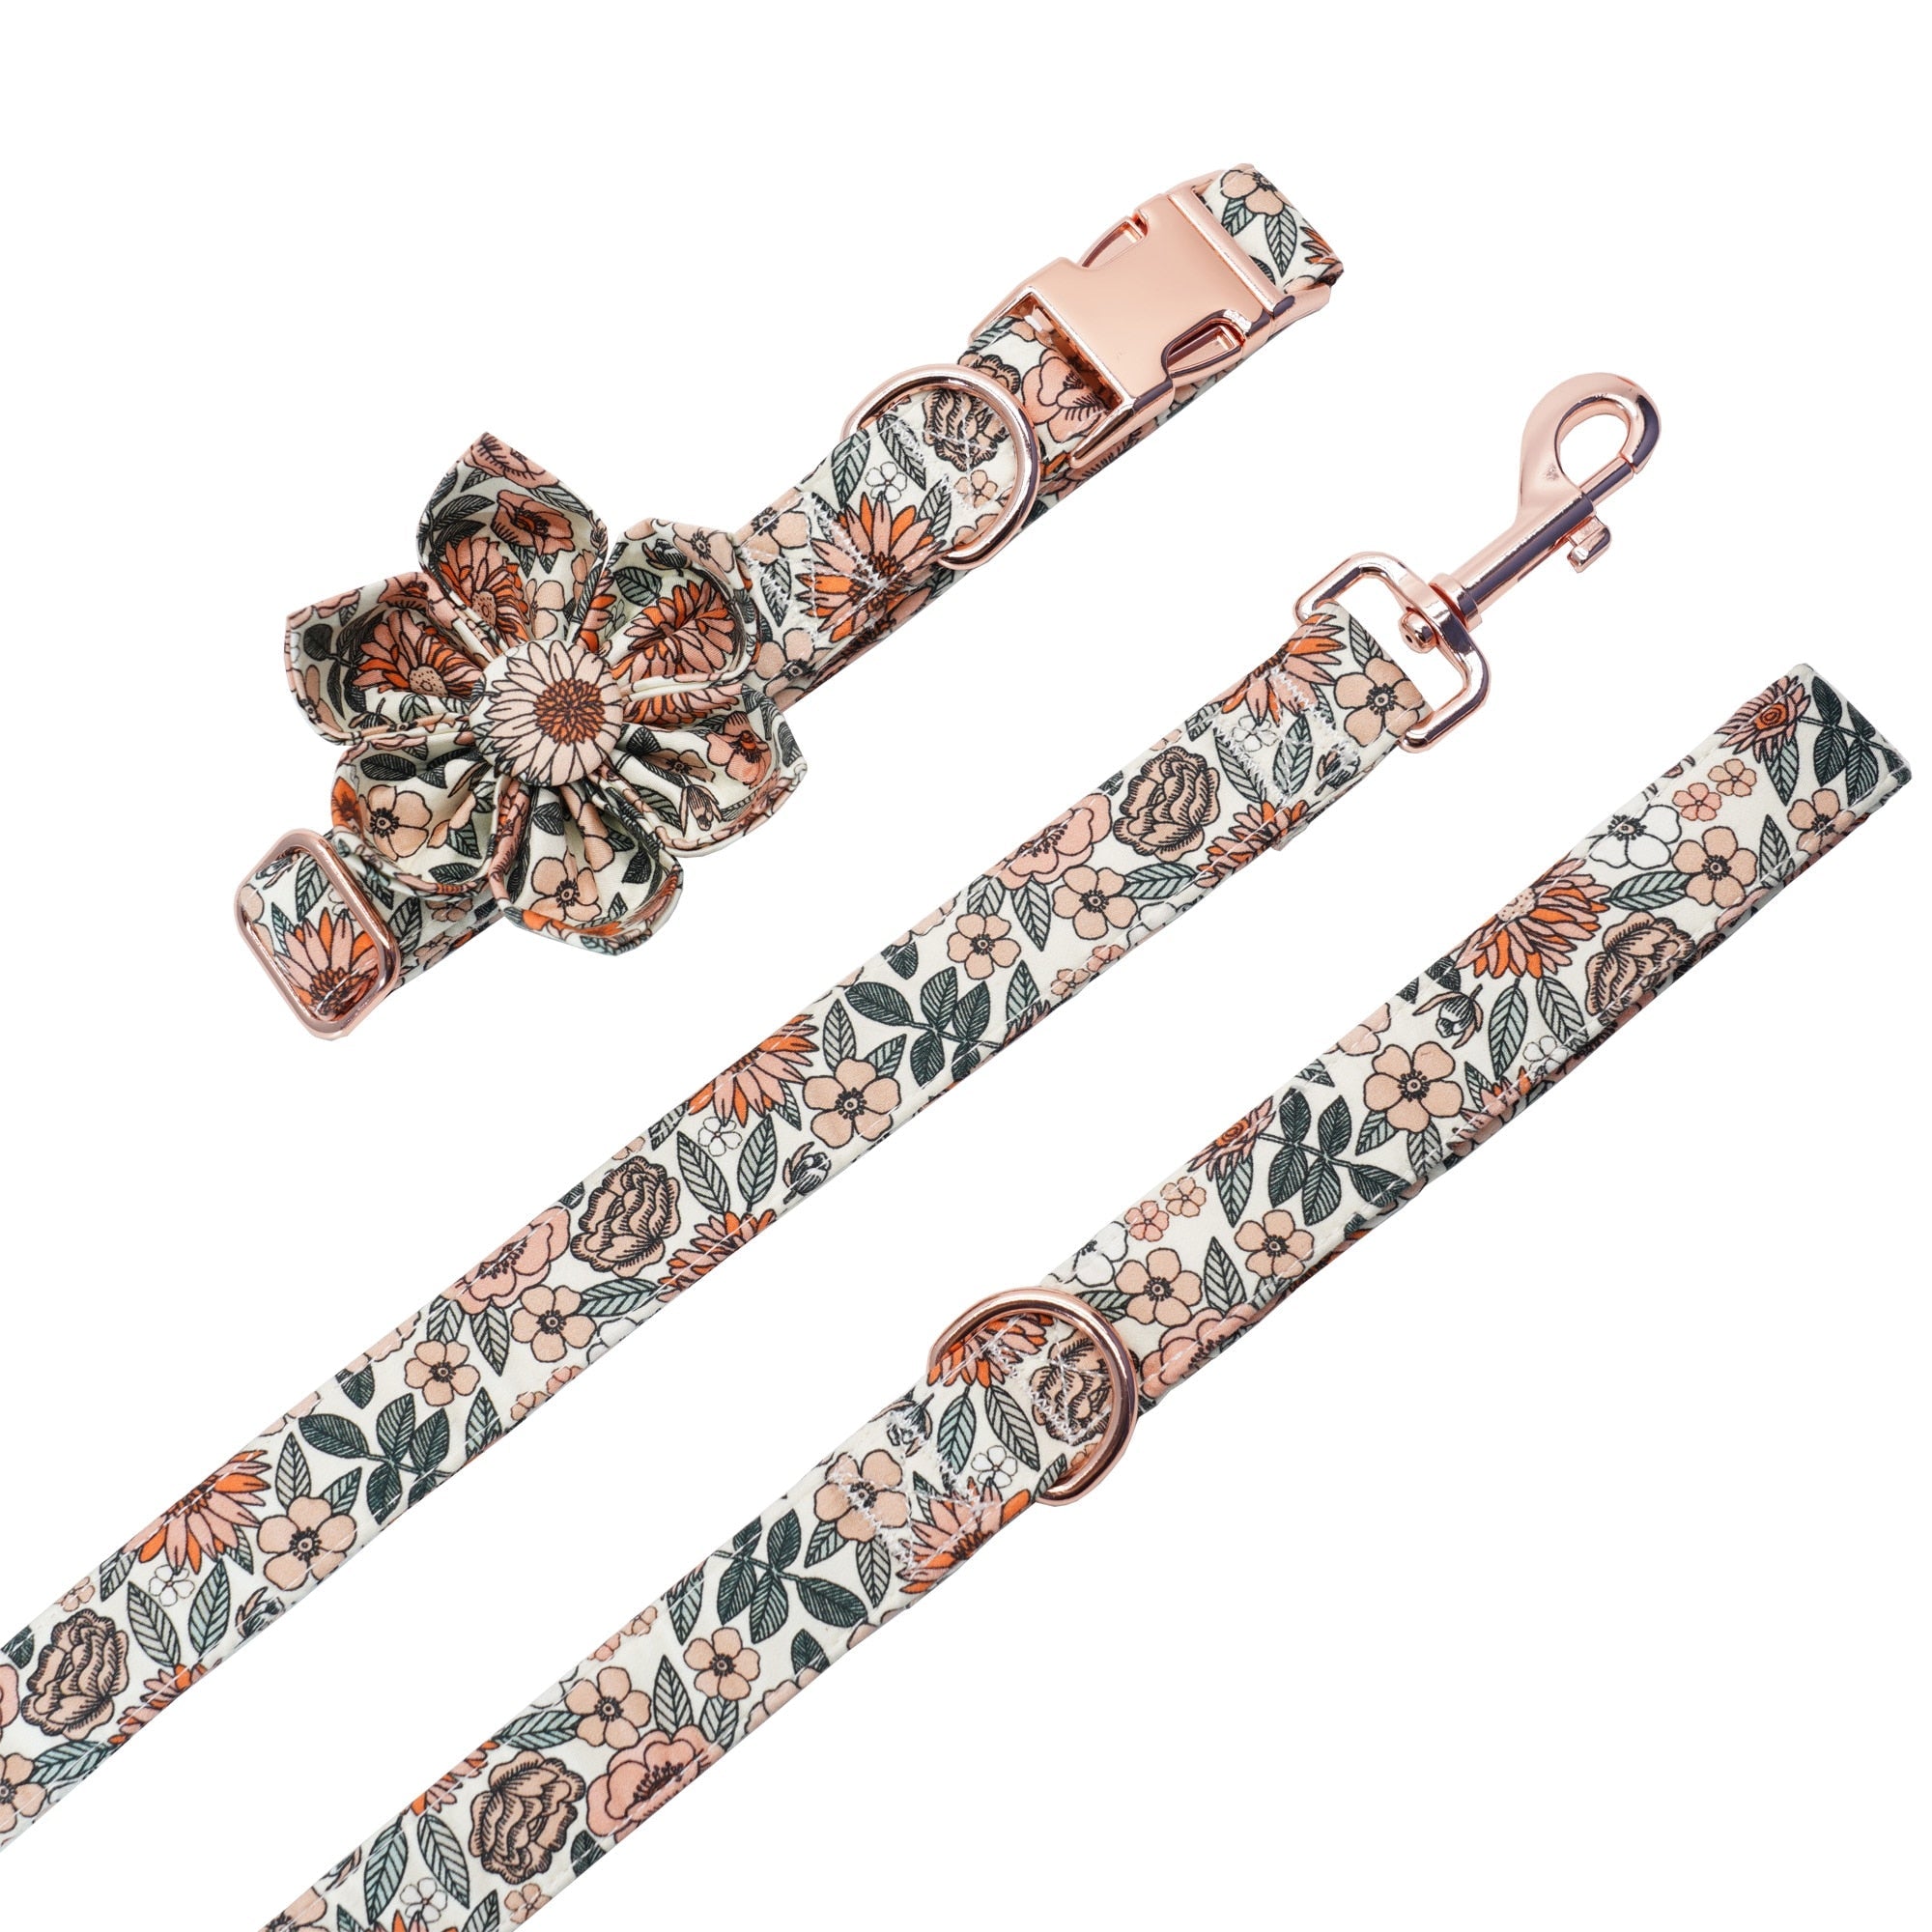 Boho Floral Flower Collar And Leash: Personalized Flower Collar And Leash Set - CurliTail